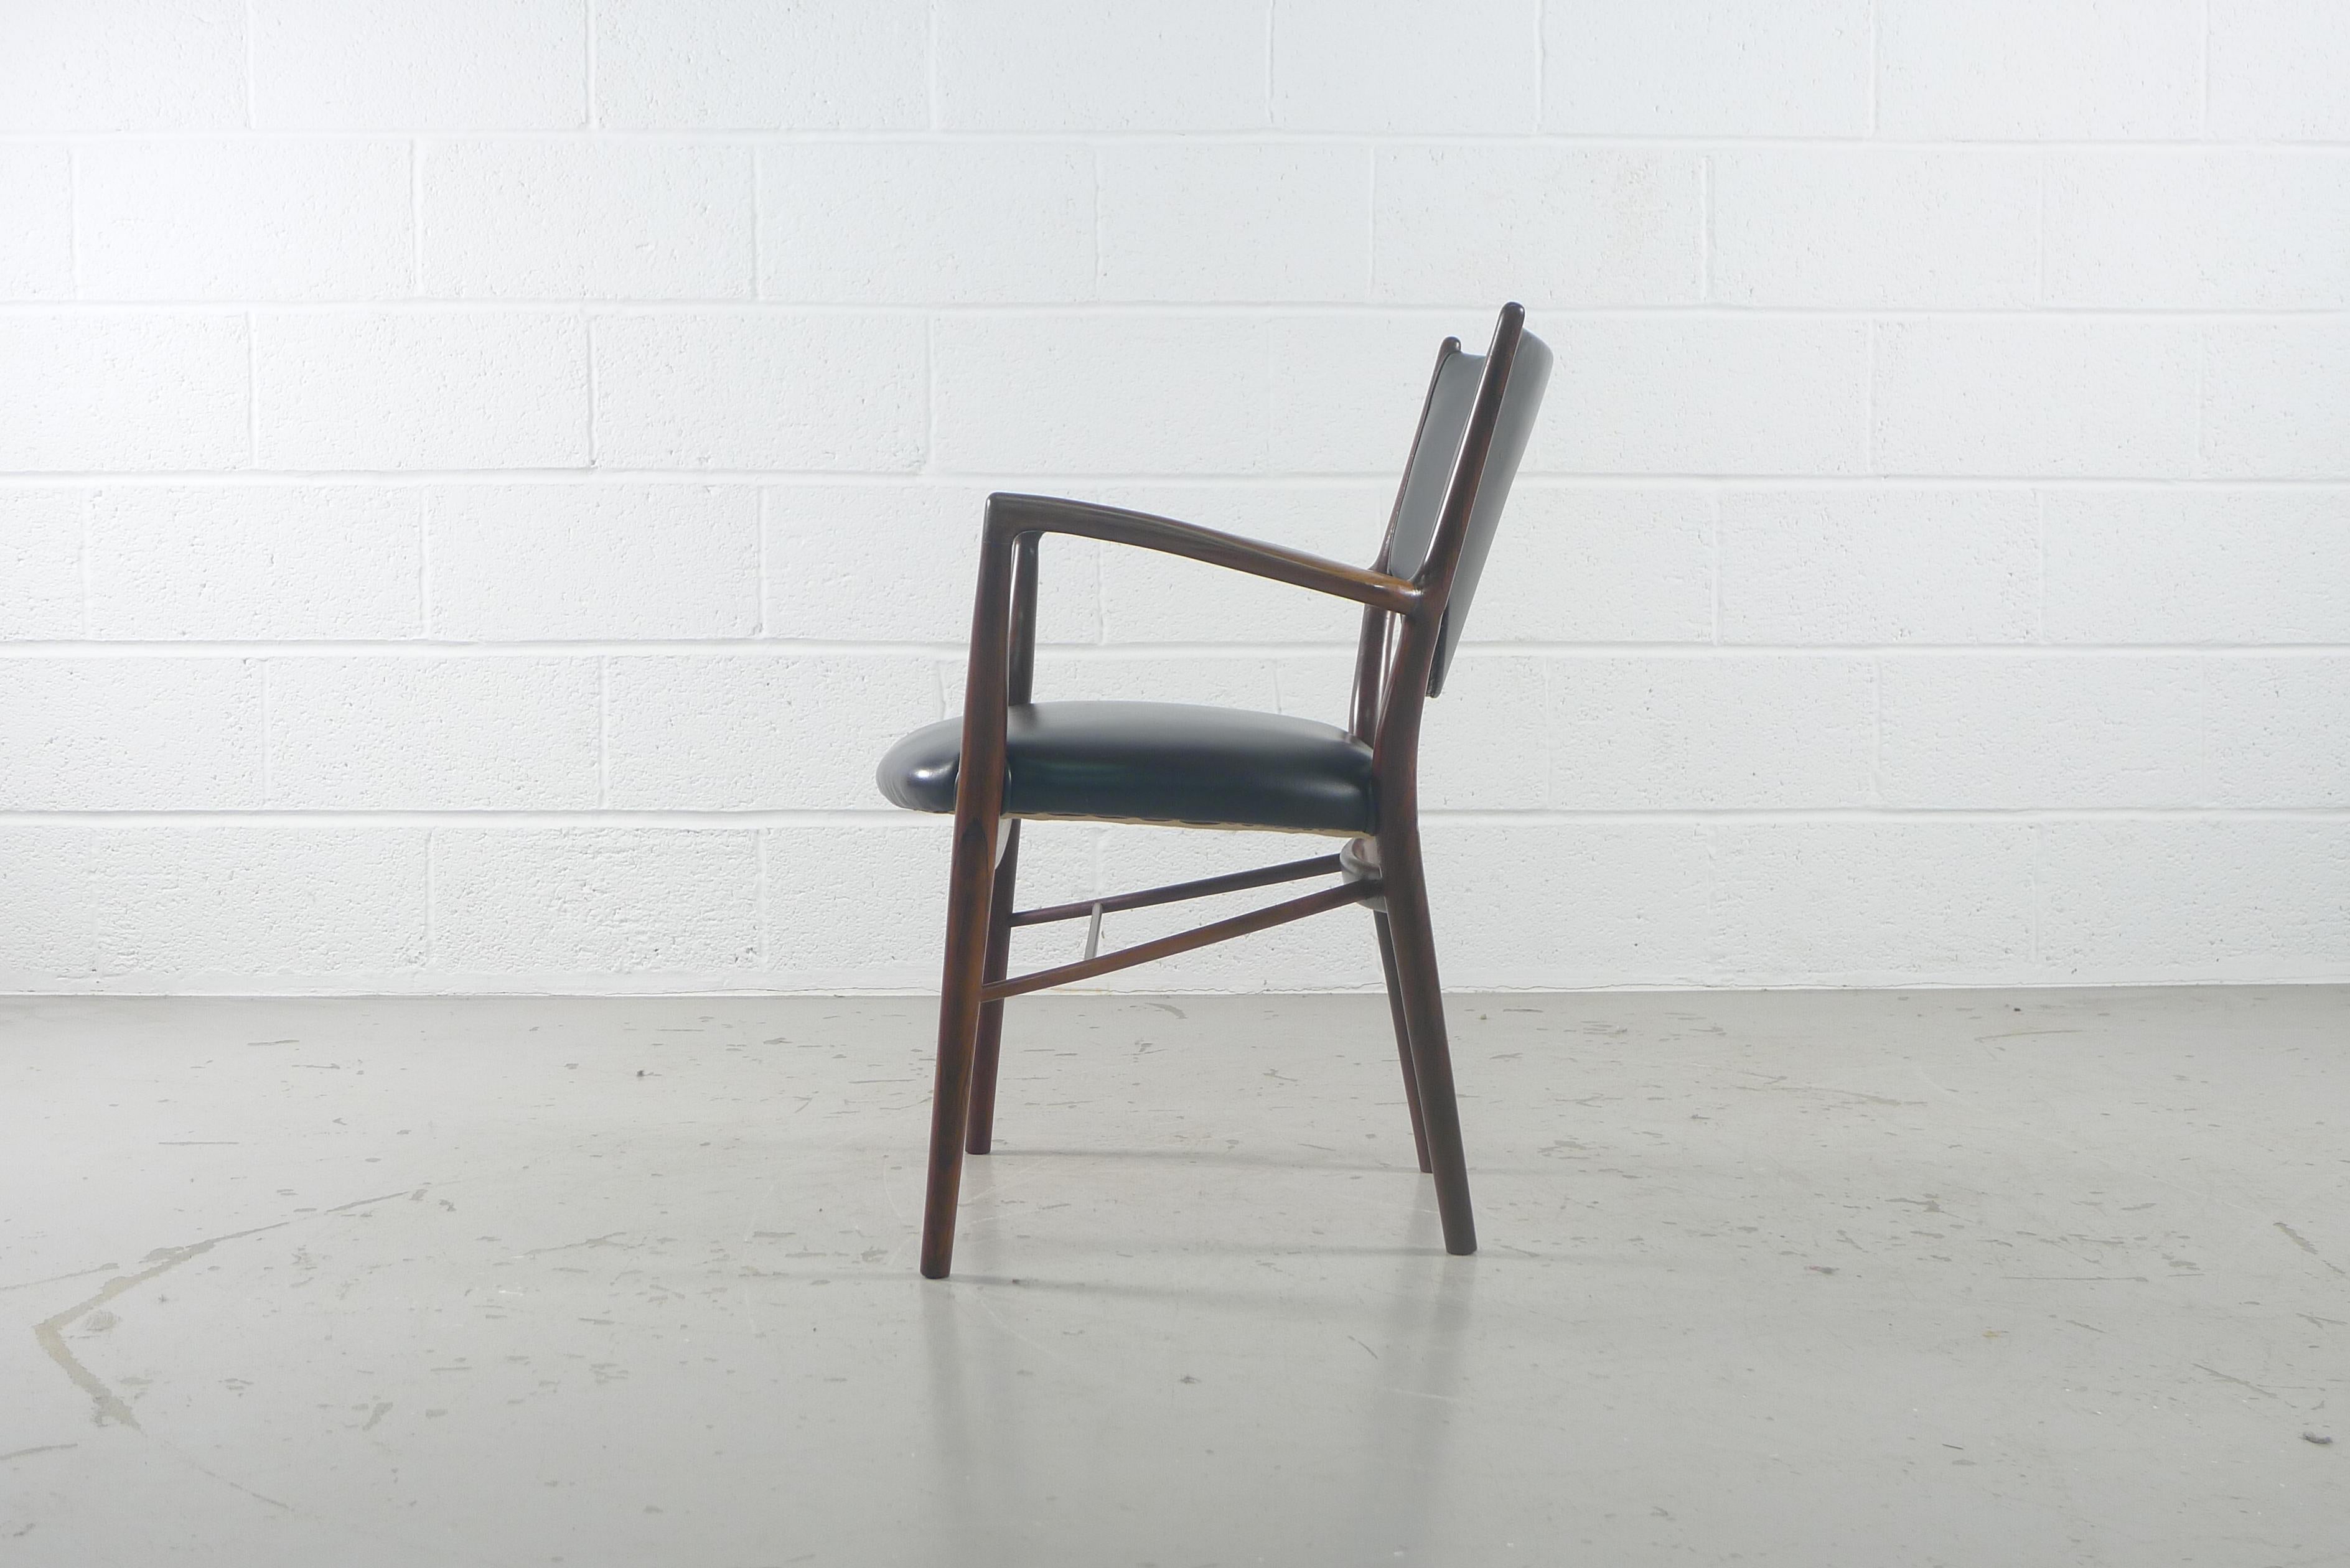 Finn Juhl NV-46 chair designed in 1946 for cabinetmaker Niels Vodder, Brazilian rosewood frame with black leather seat and back, elegant and lightweight in appearance.
Stamped behind front stretcher 